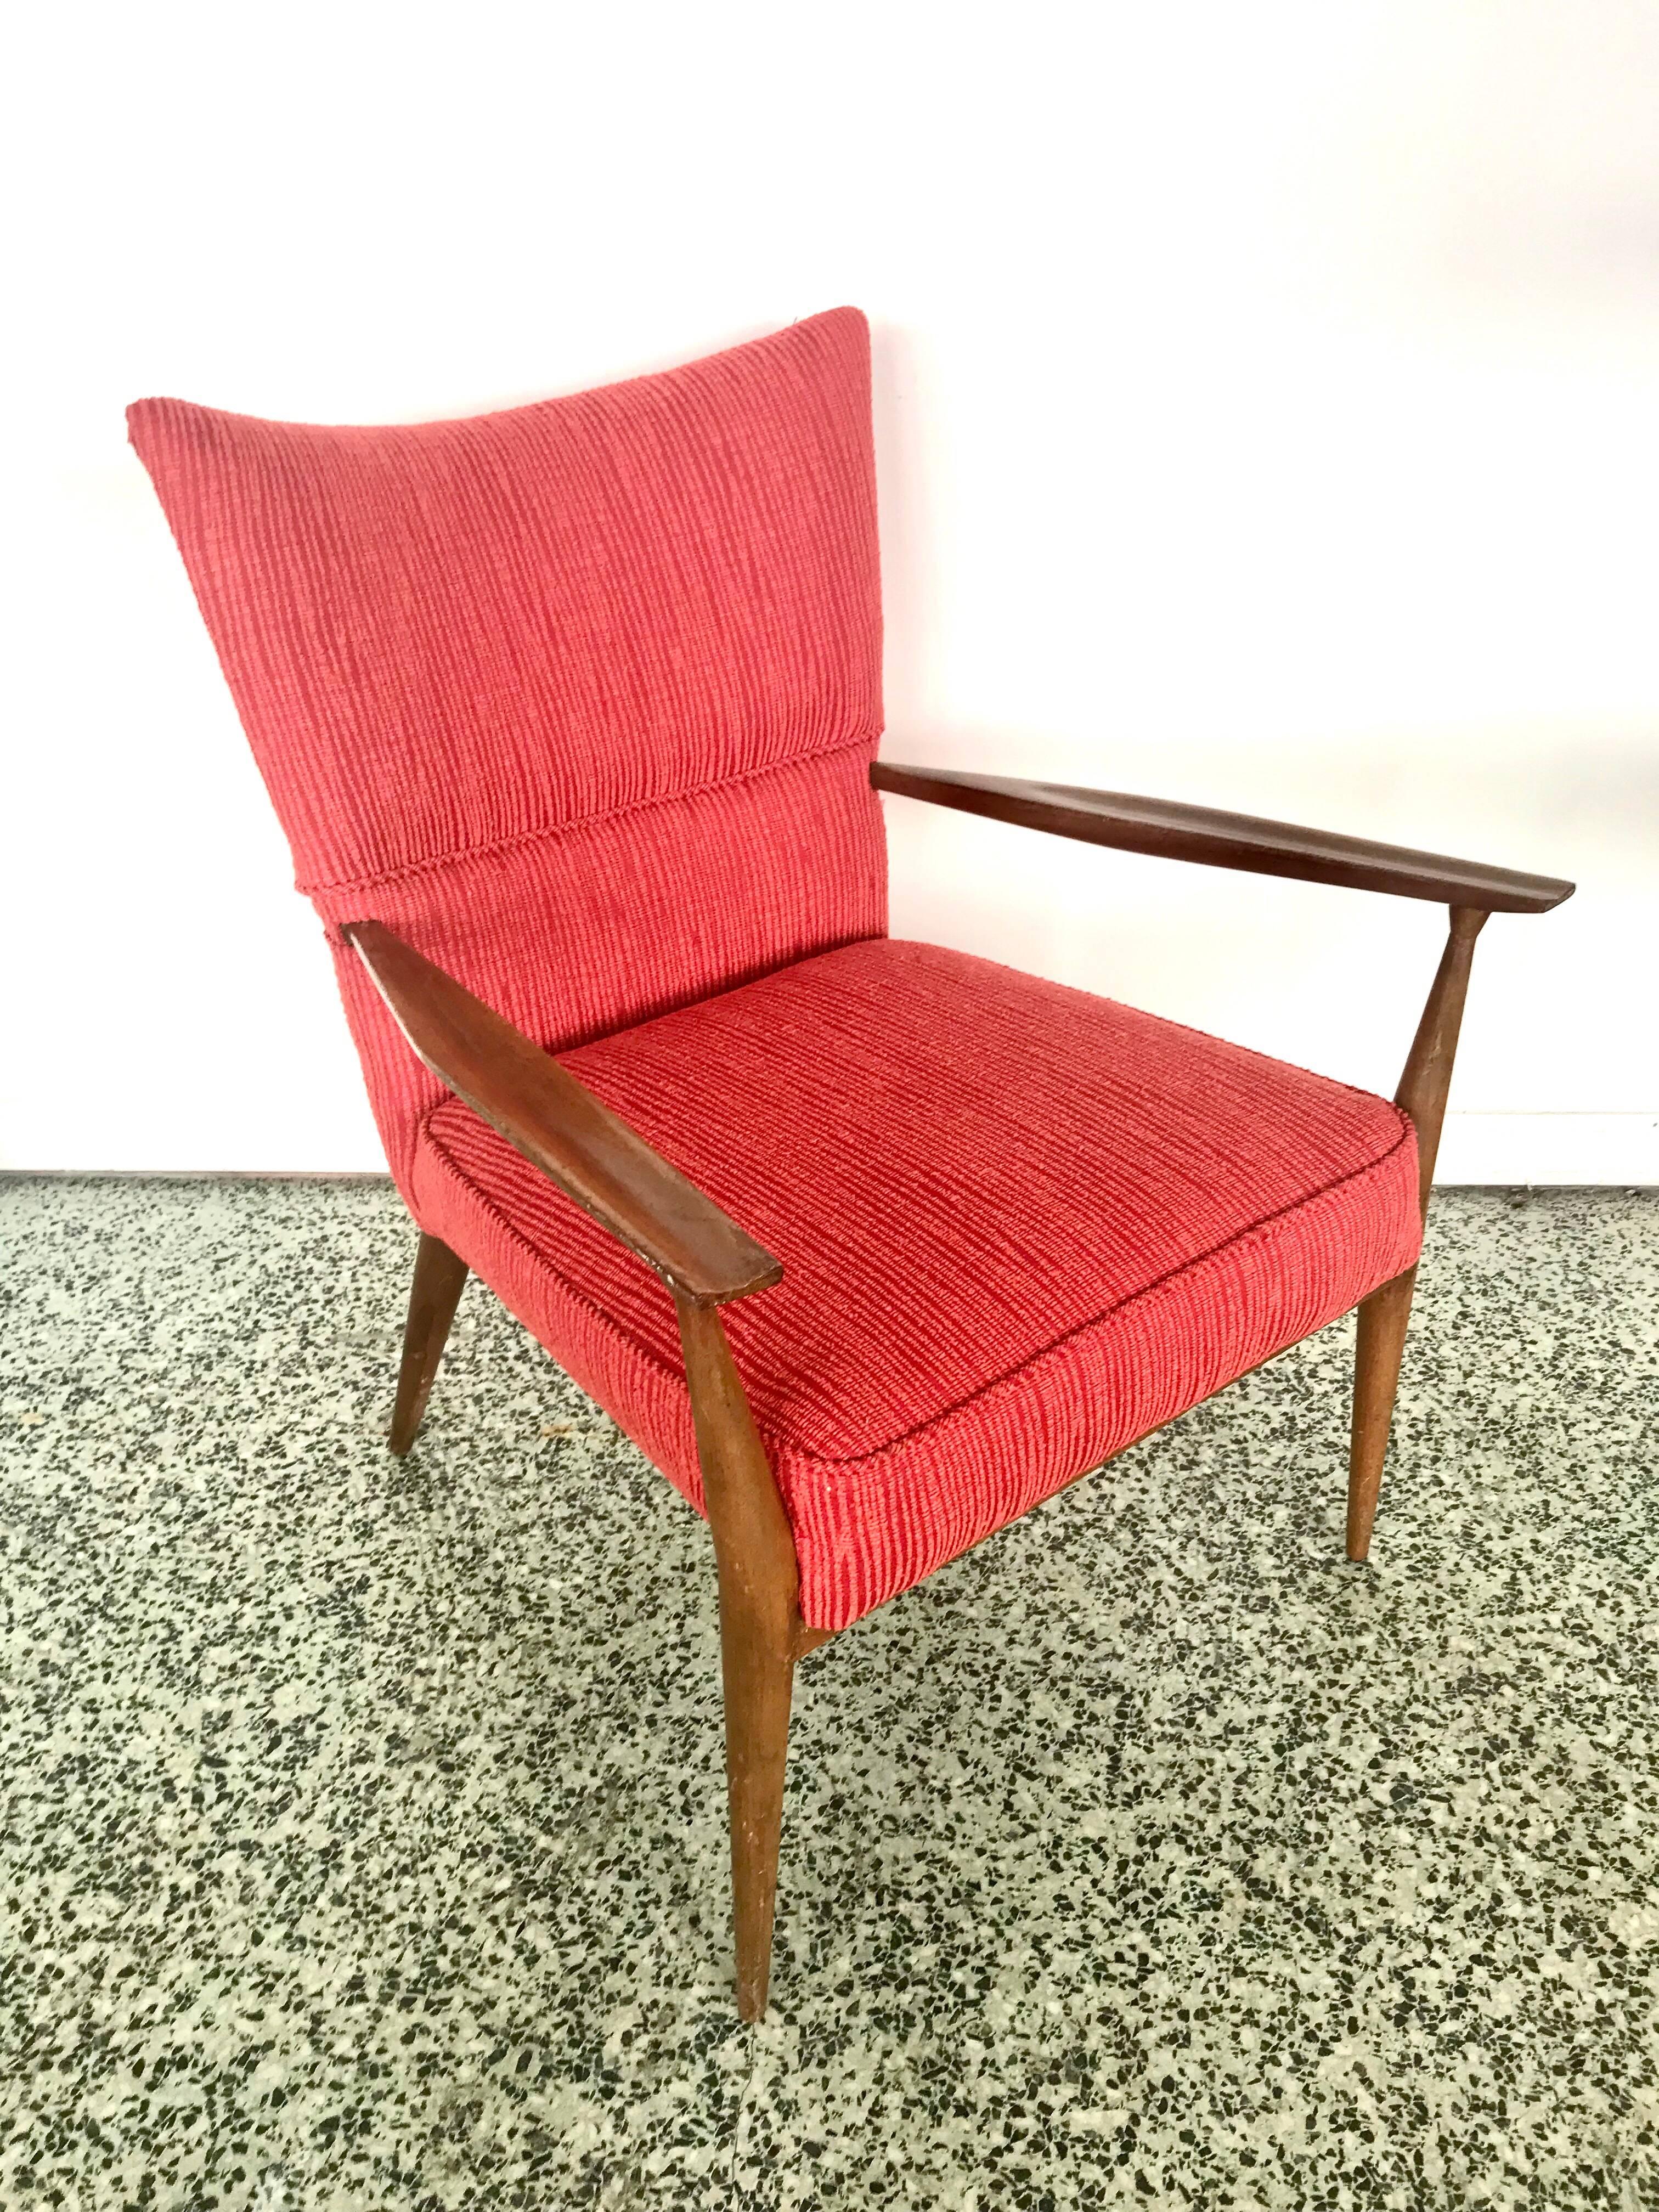 Designer: Paul McCobb
Manufacturer: Directional
Period/style: Mid-Century Modern
Country: USA
Date 1950s

Recently reupholstered in Knoll fabric.